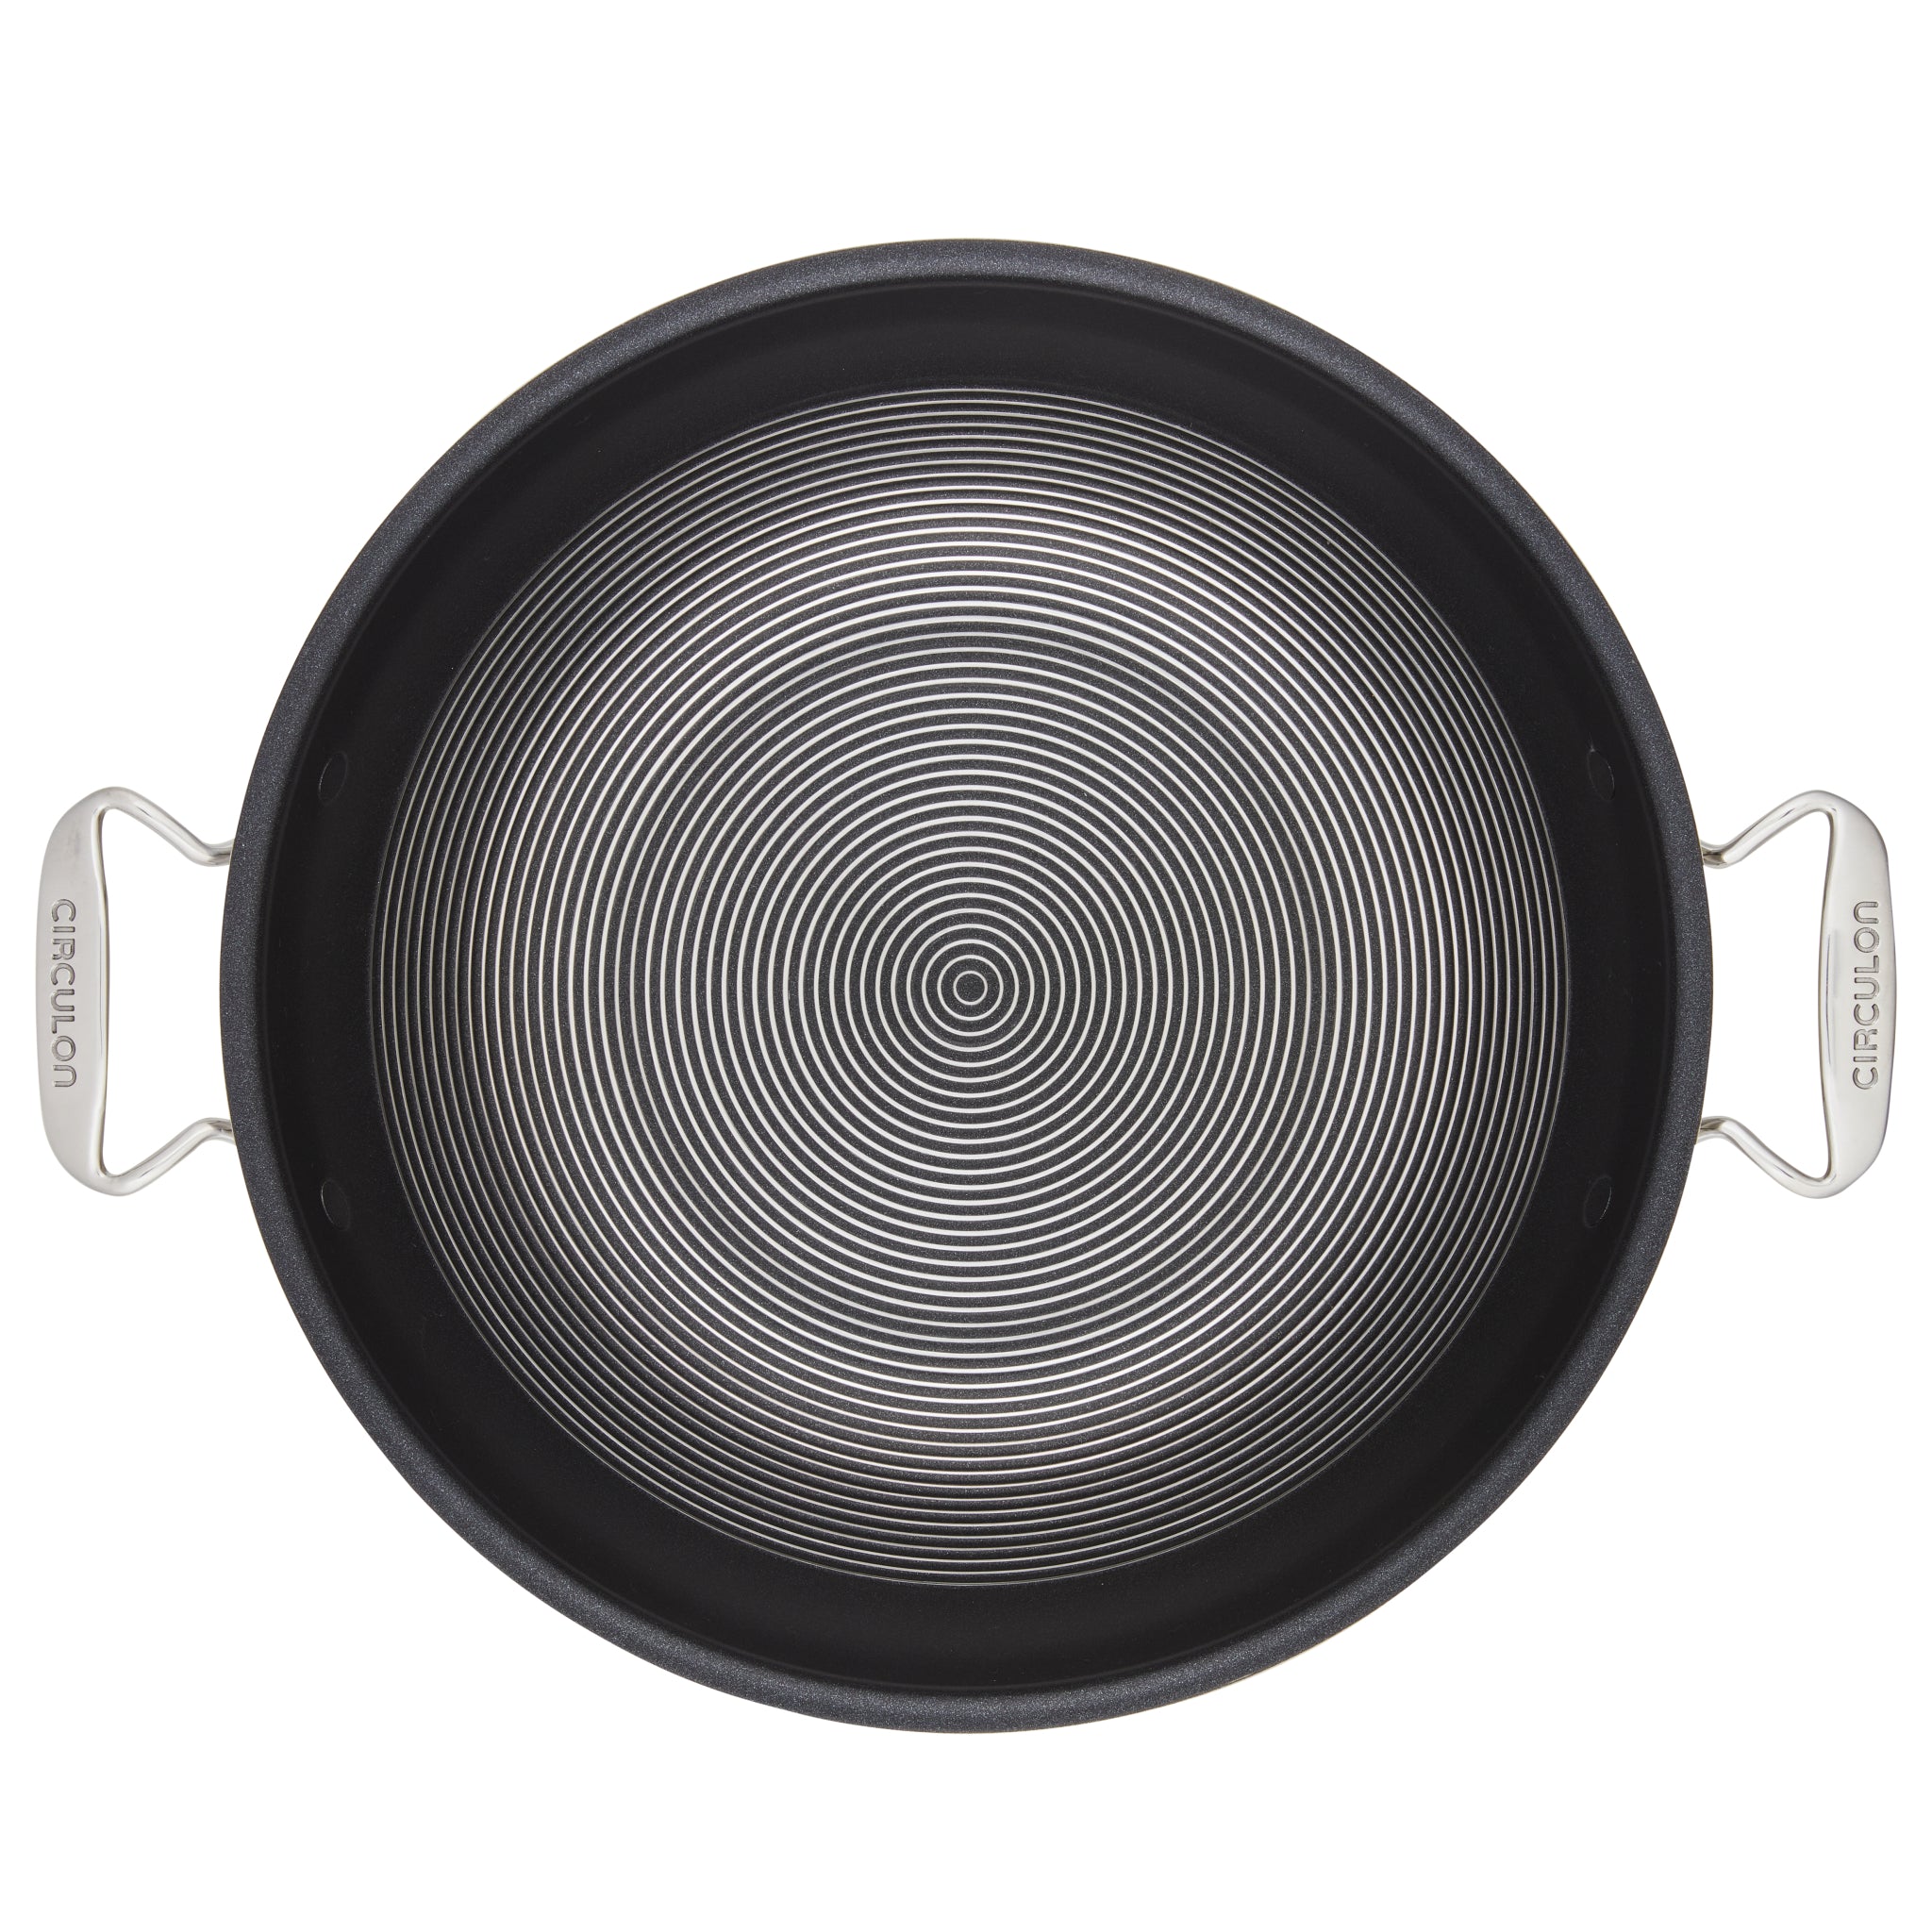 Circulon SteelShield Wok with Glass Lid Review